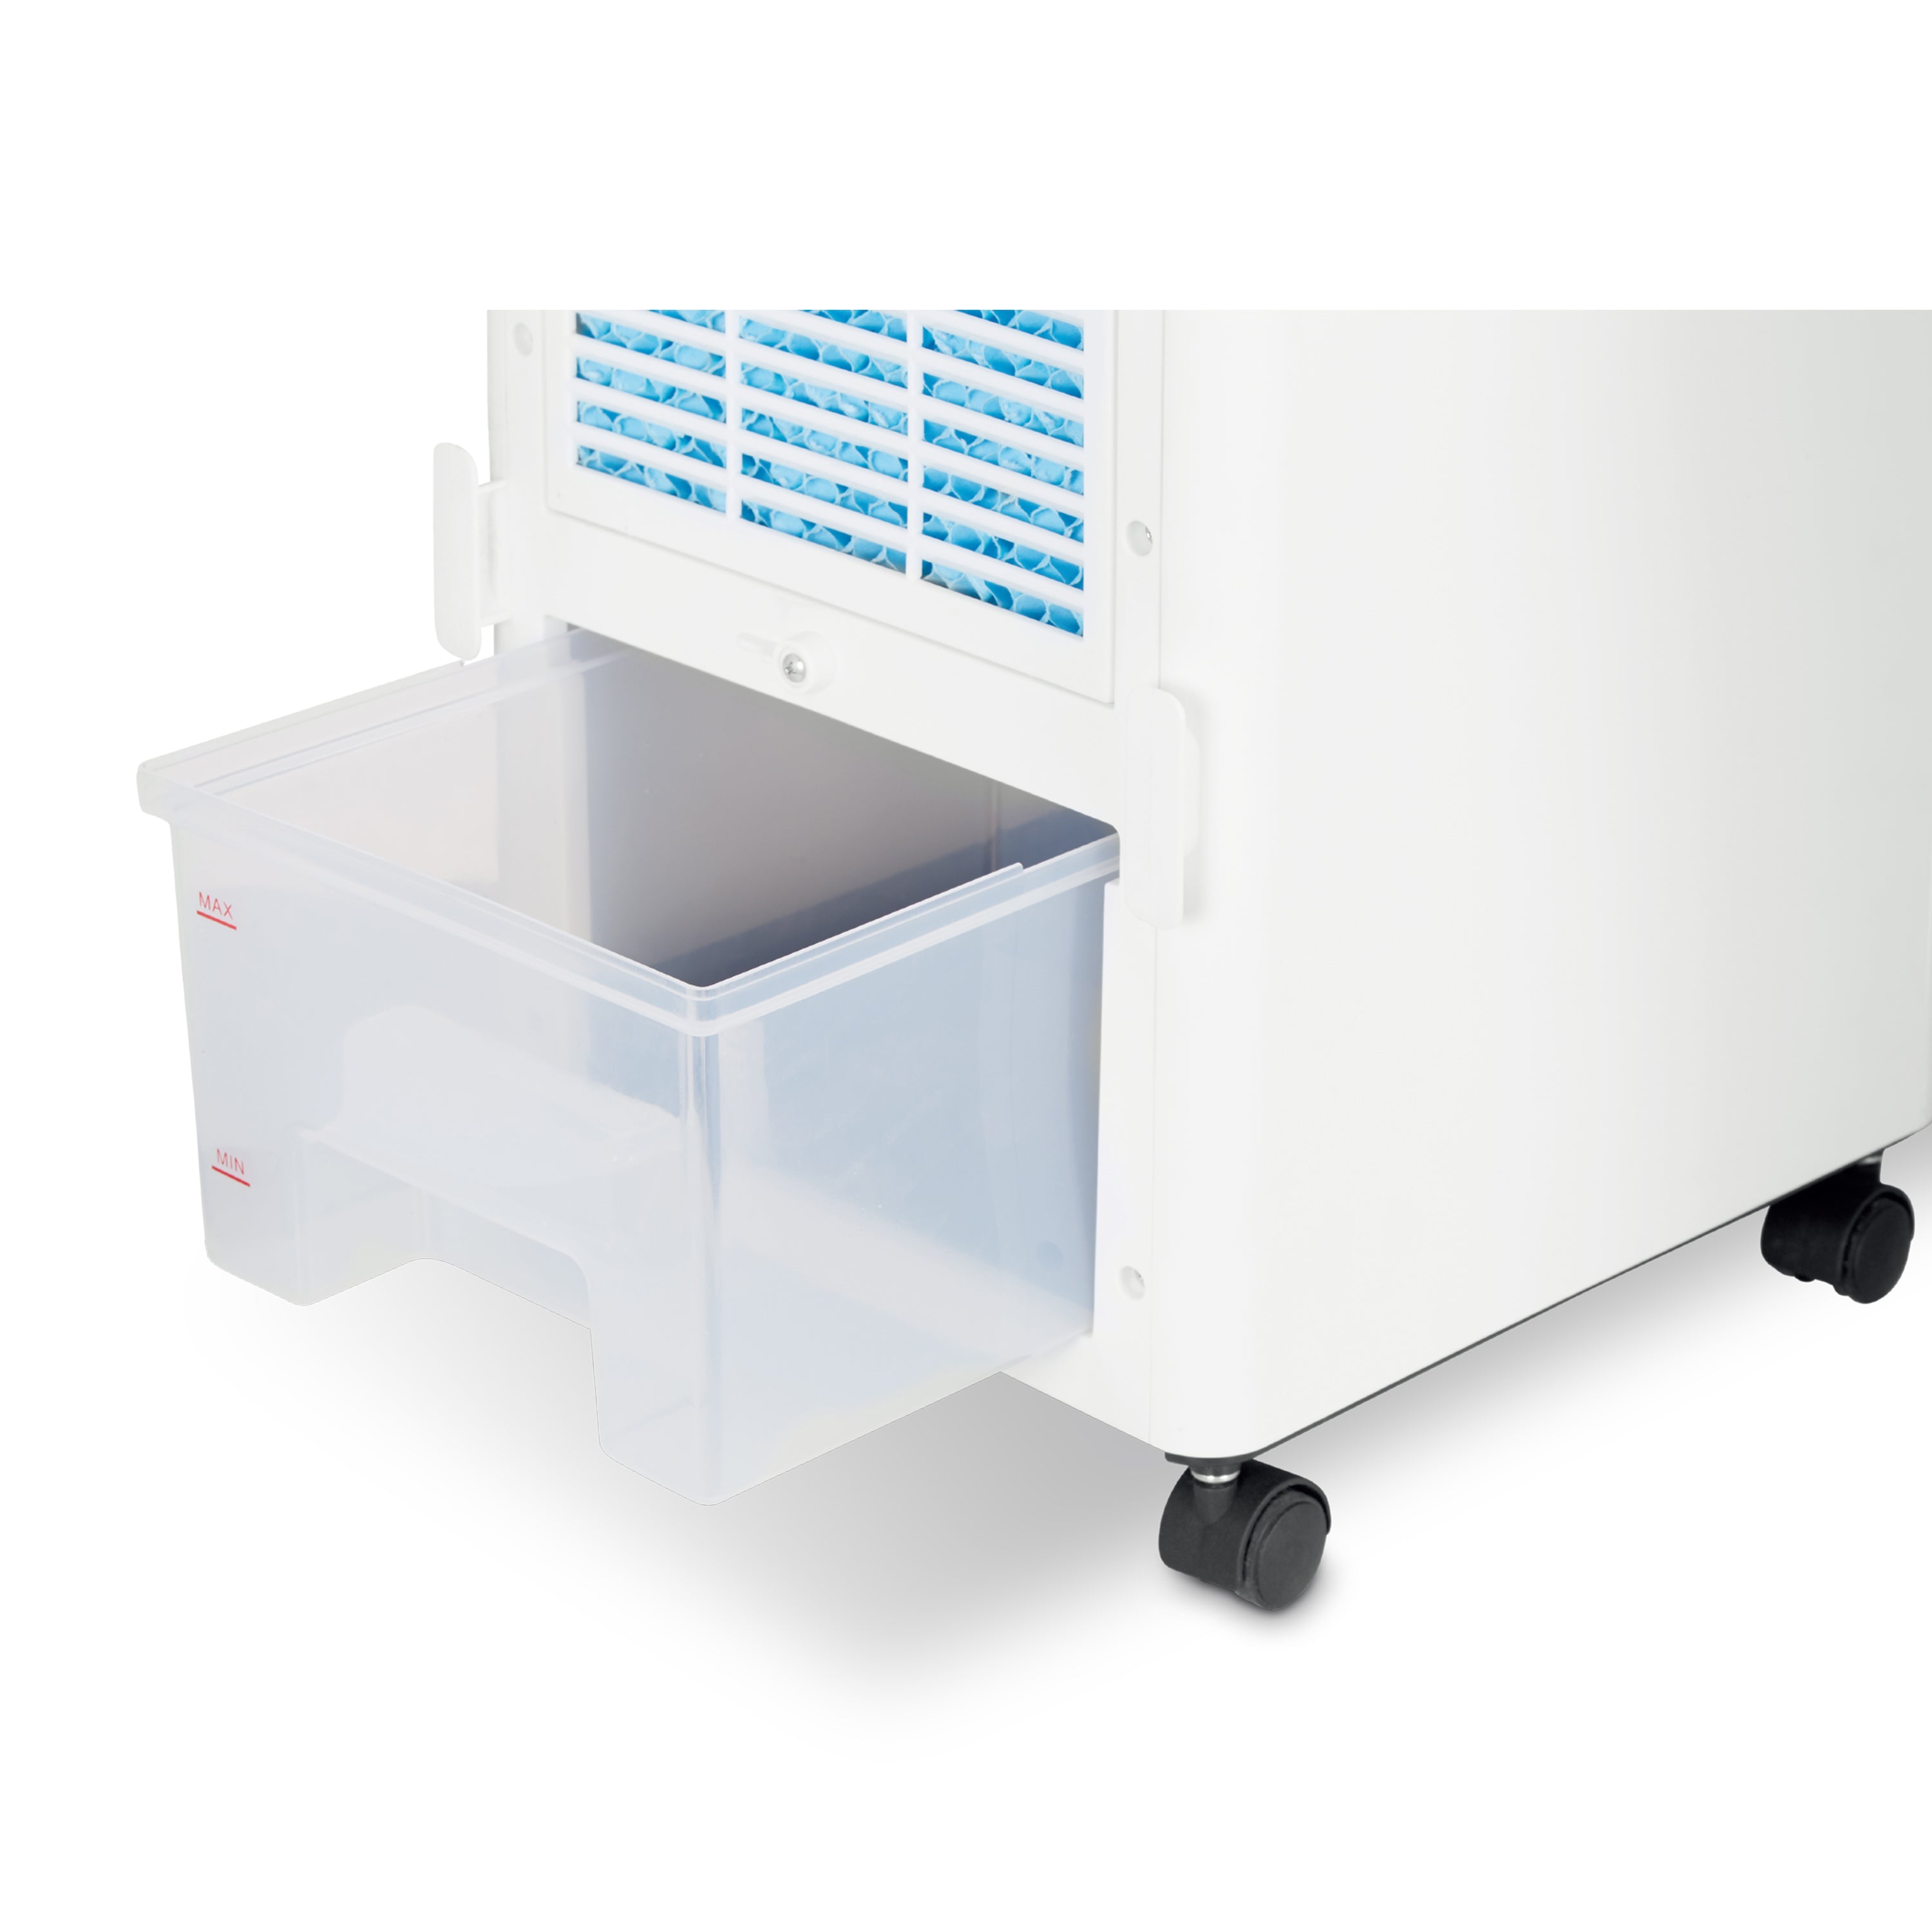 AMOS Eezy Air Heater & Coolers